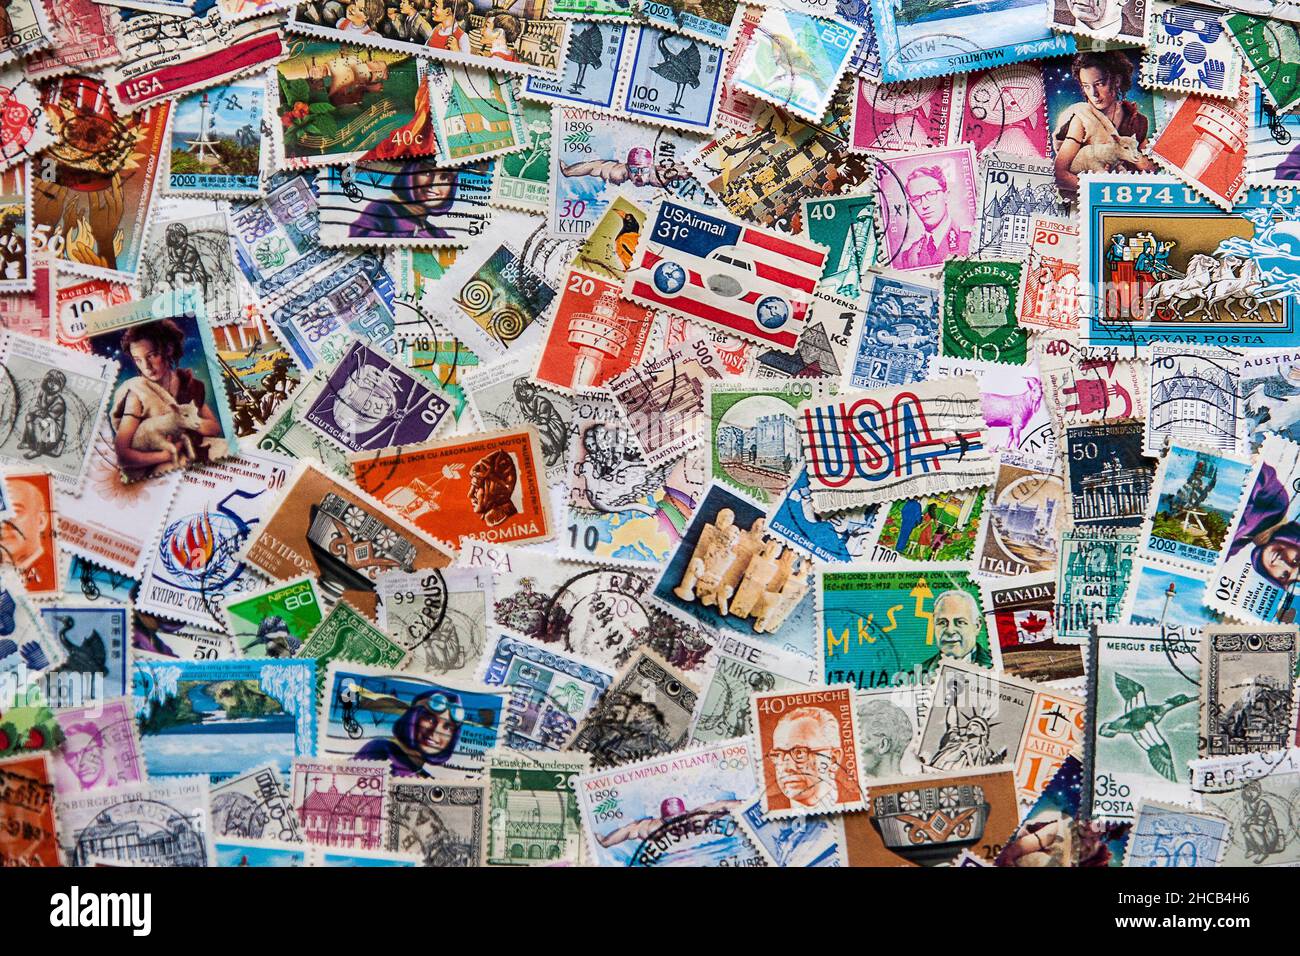 Old postage stamps from various countries Stock Photo